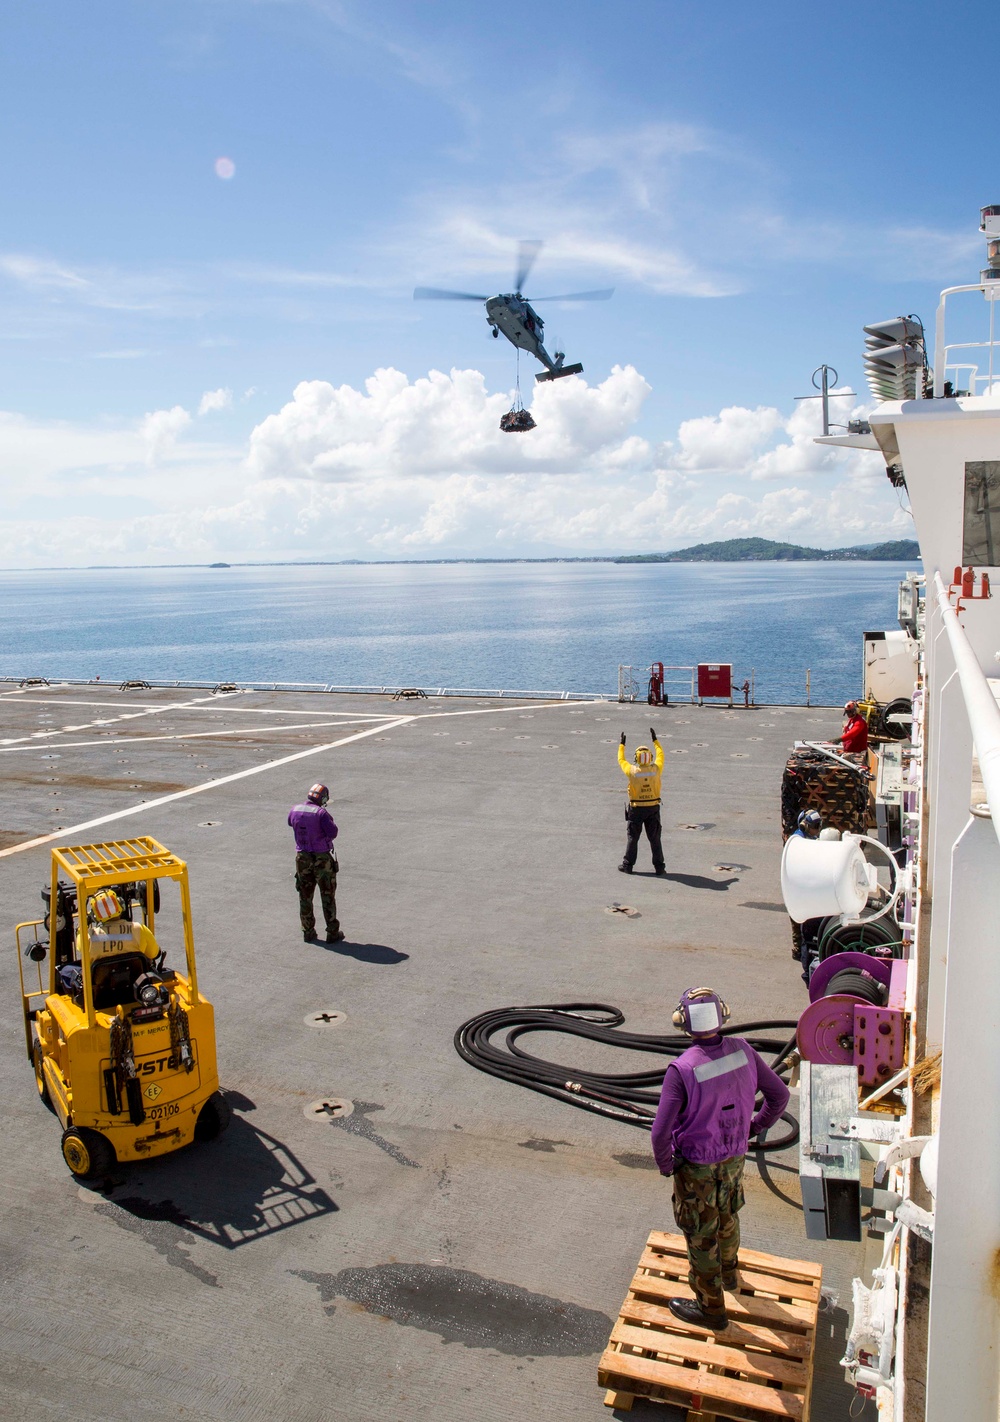 MH-60S conducts vertical replenisment aboard USNS Mercy